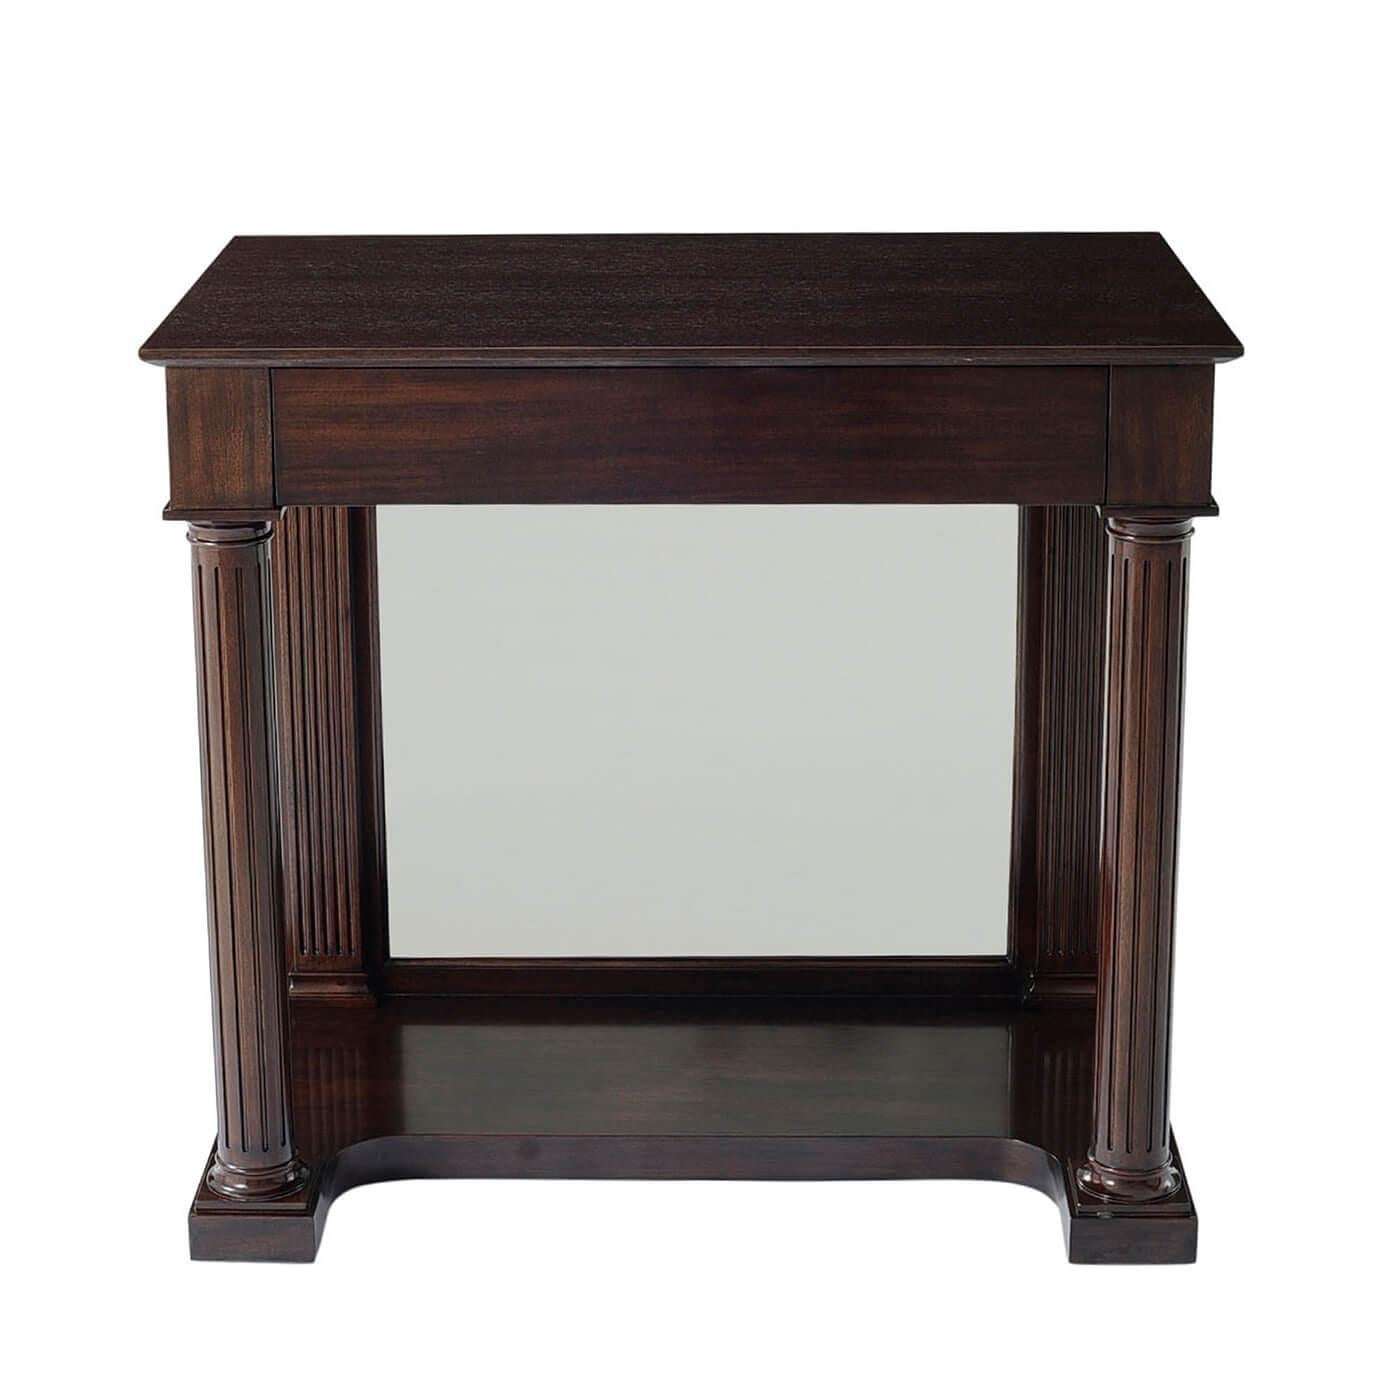 A French Empire style Neo Classic console table with strict lines, perfect symmetries, and secrets. A plain frieze apron holds a hidden drawer. The table base is a network of turned and fluted column supports and pilasters with a mirrored back